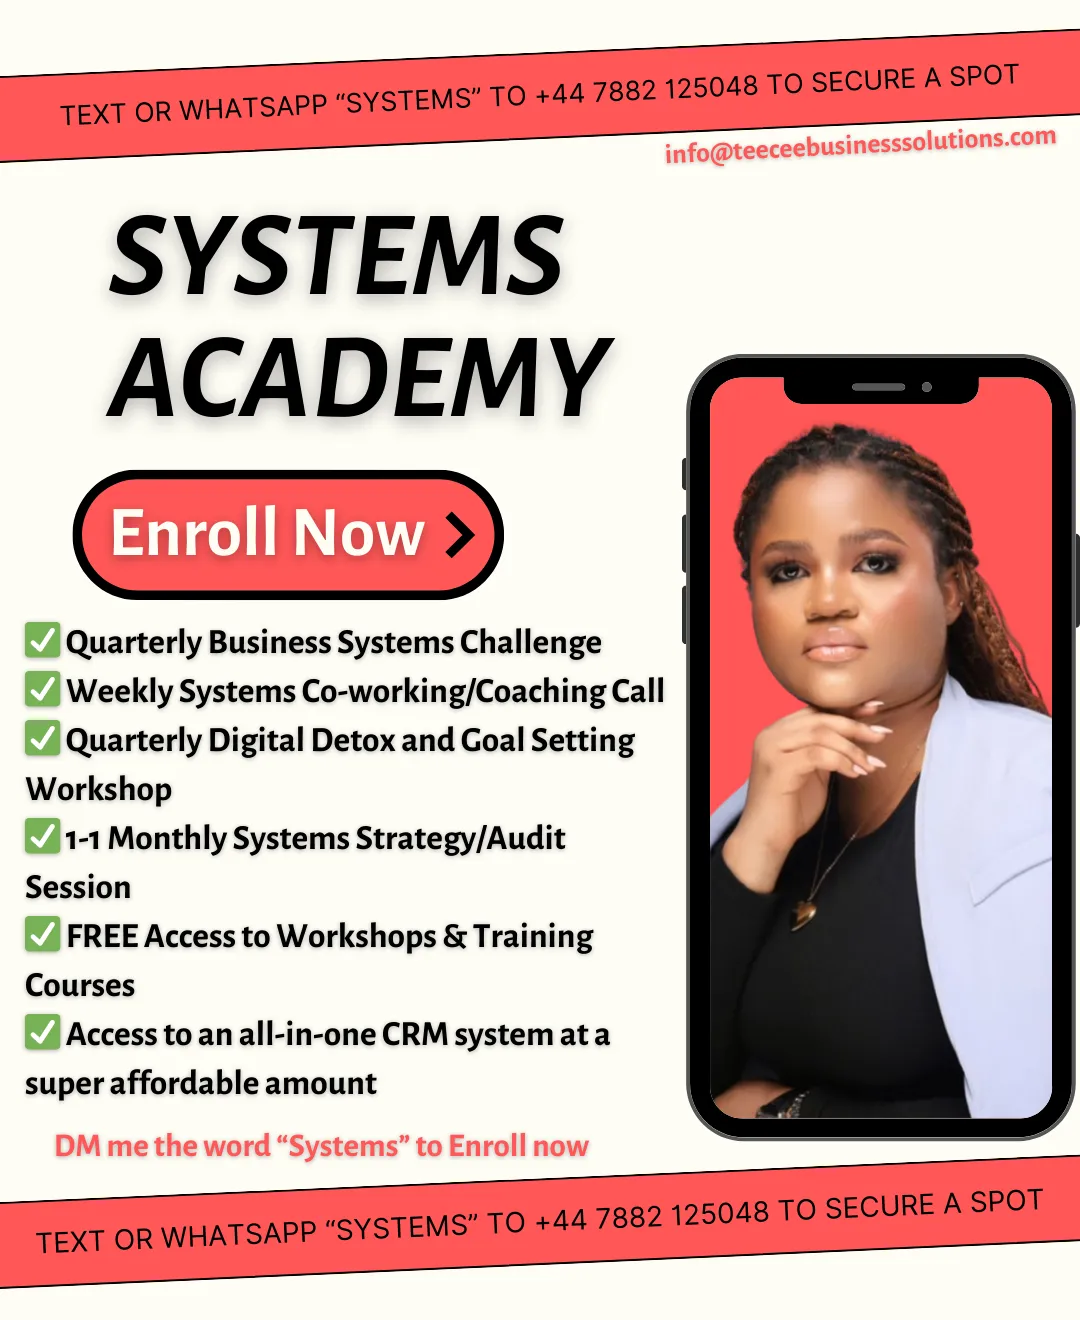 Don''t build your systems in isolation. oin the systems academy